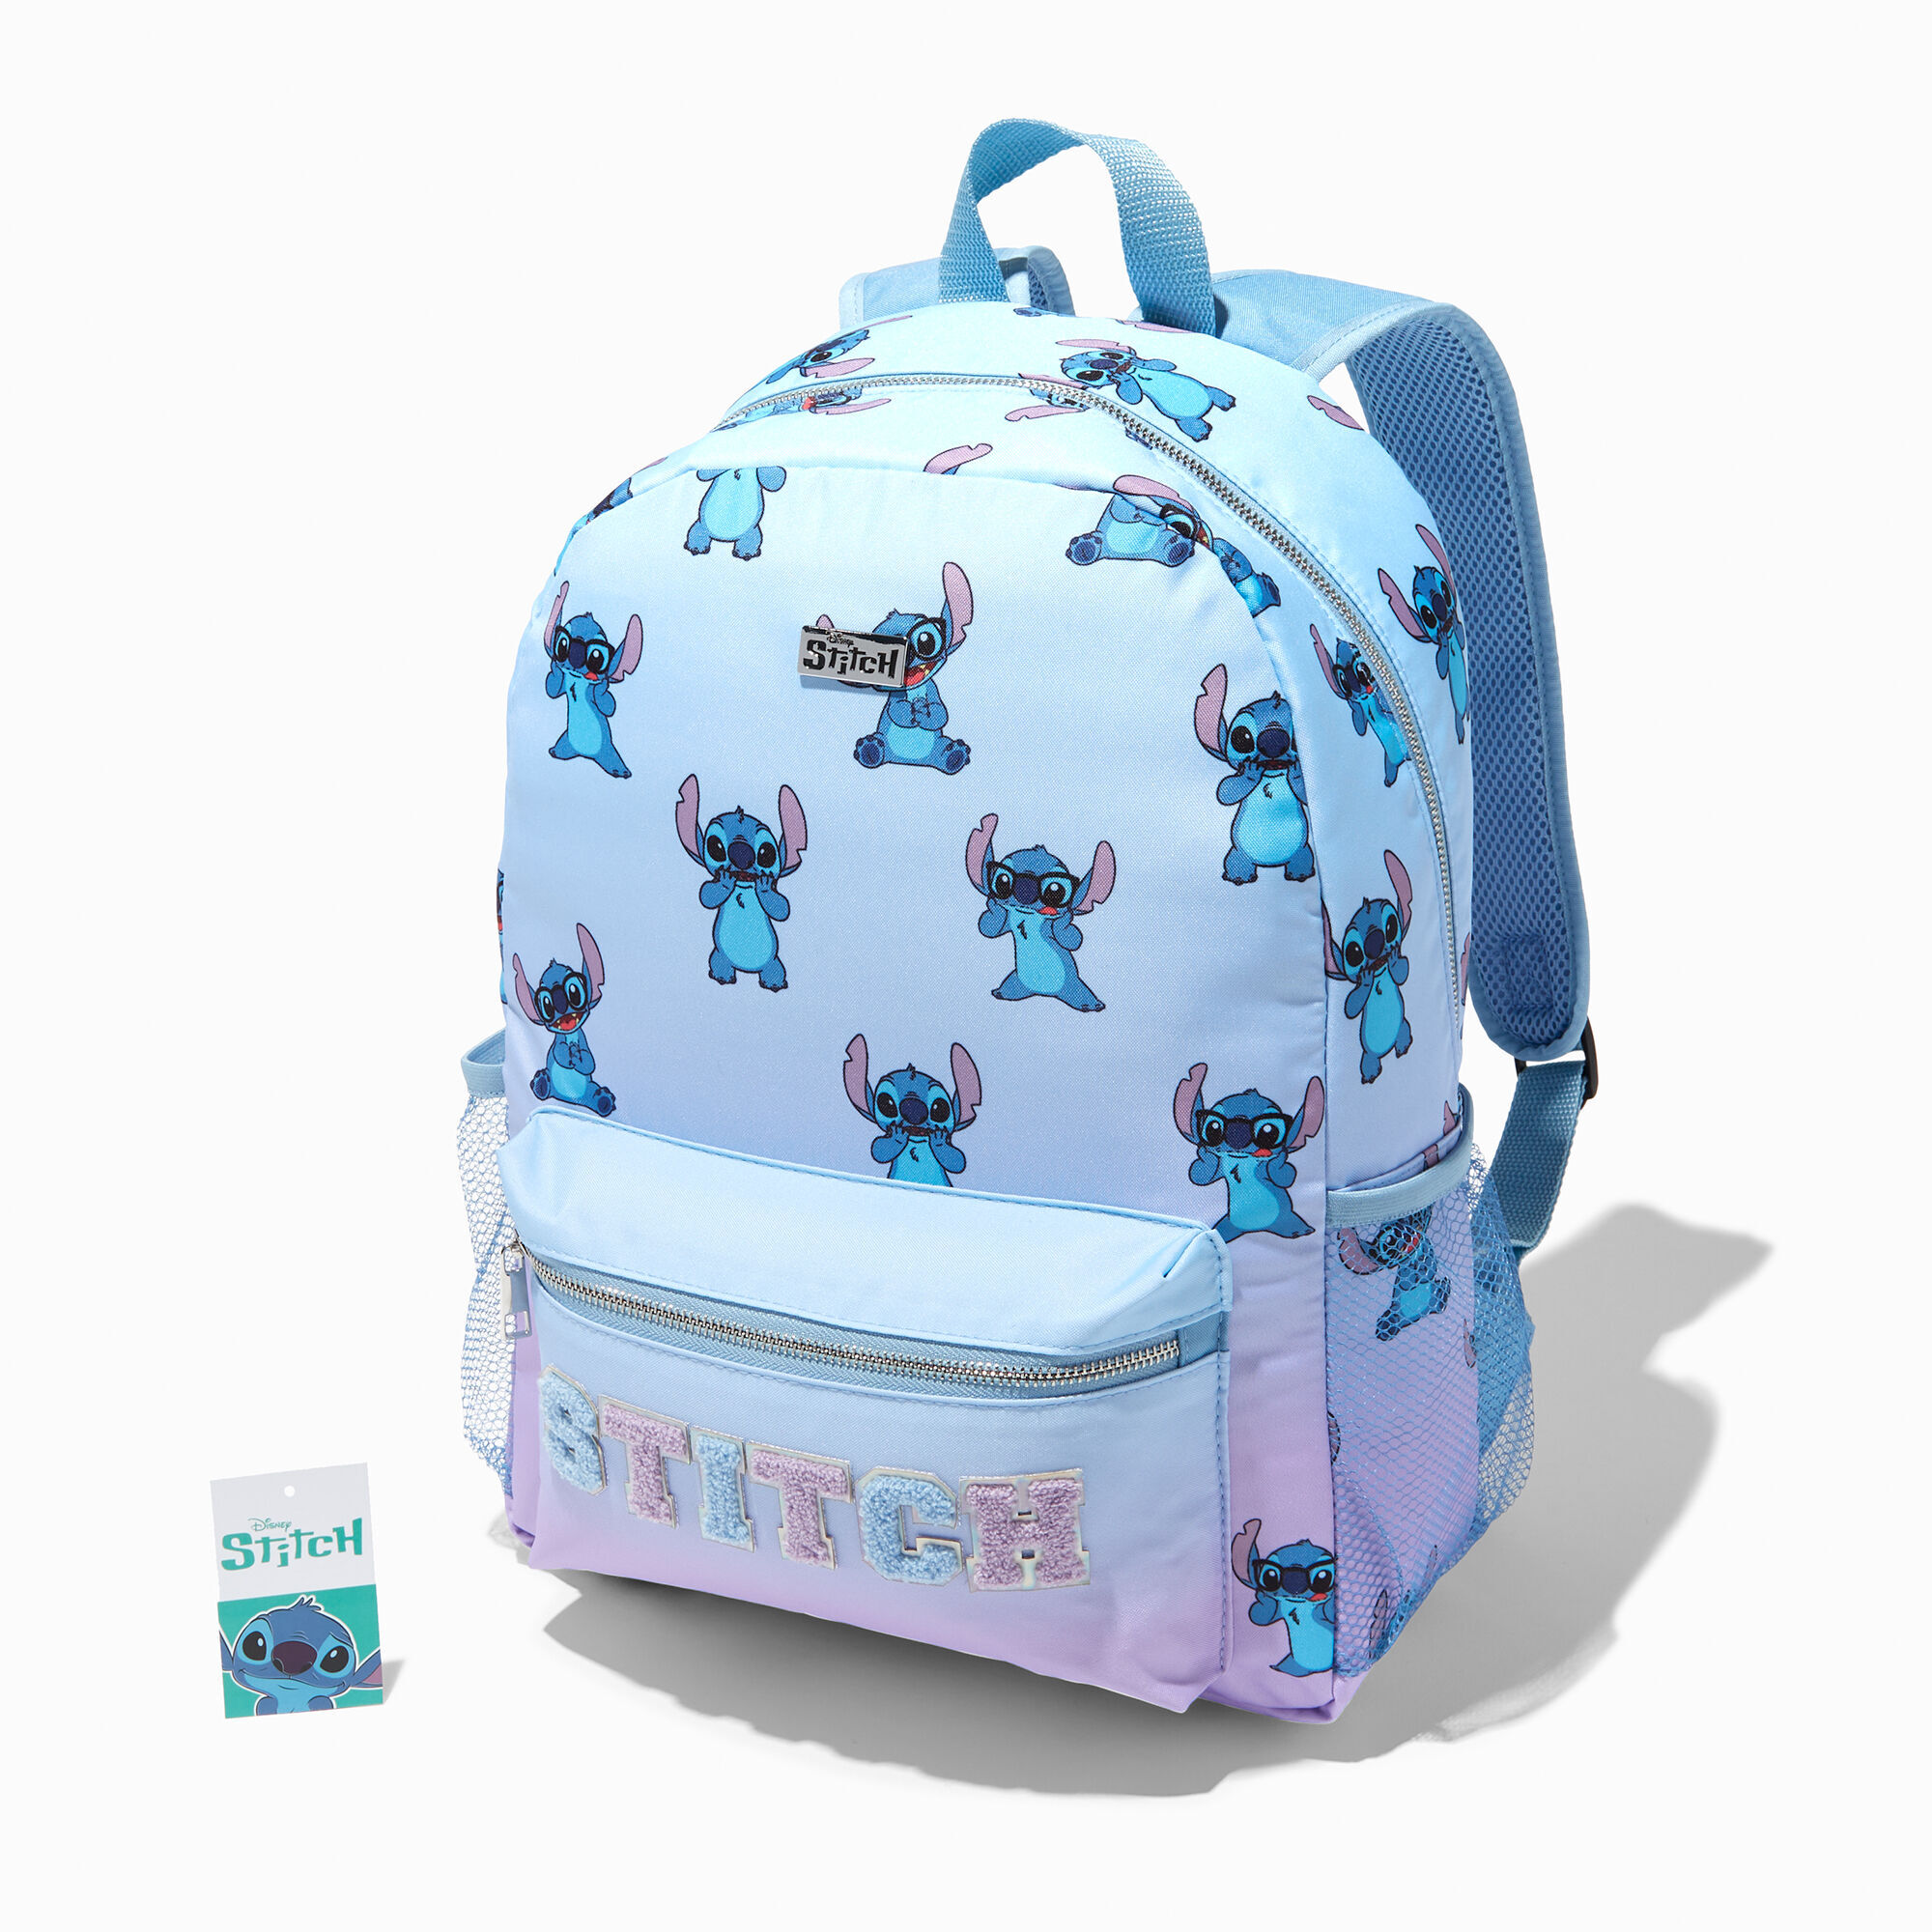 View Claires Disney Stitch Varsity Backpack information